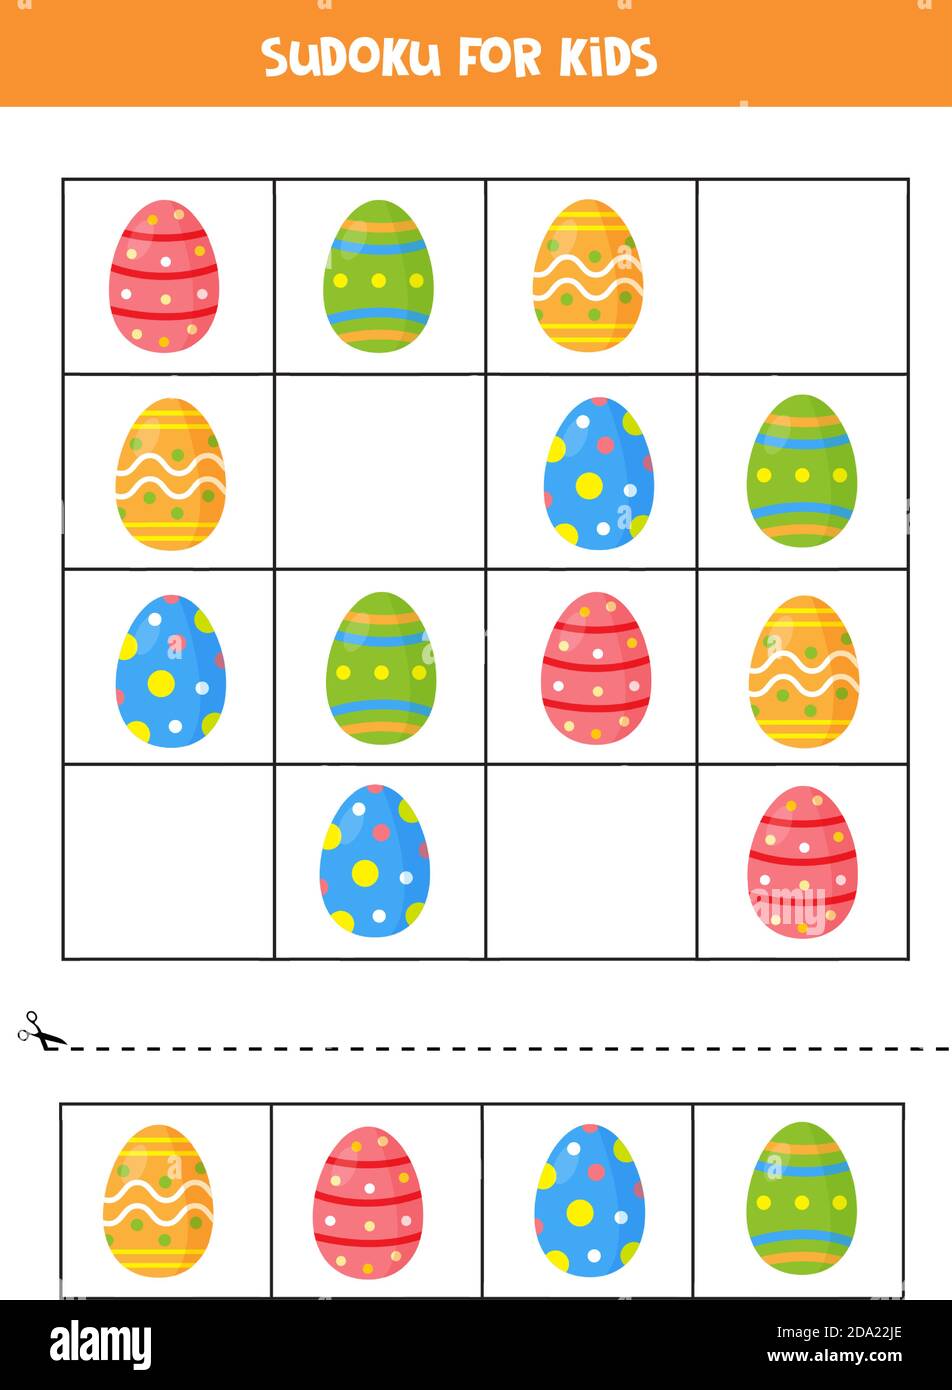 Sudoku game. Set of colorful Easter eggs. Stock Vector